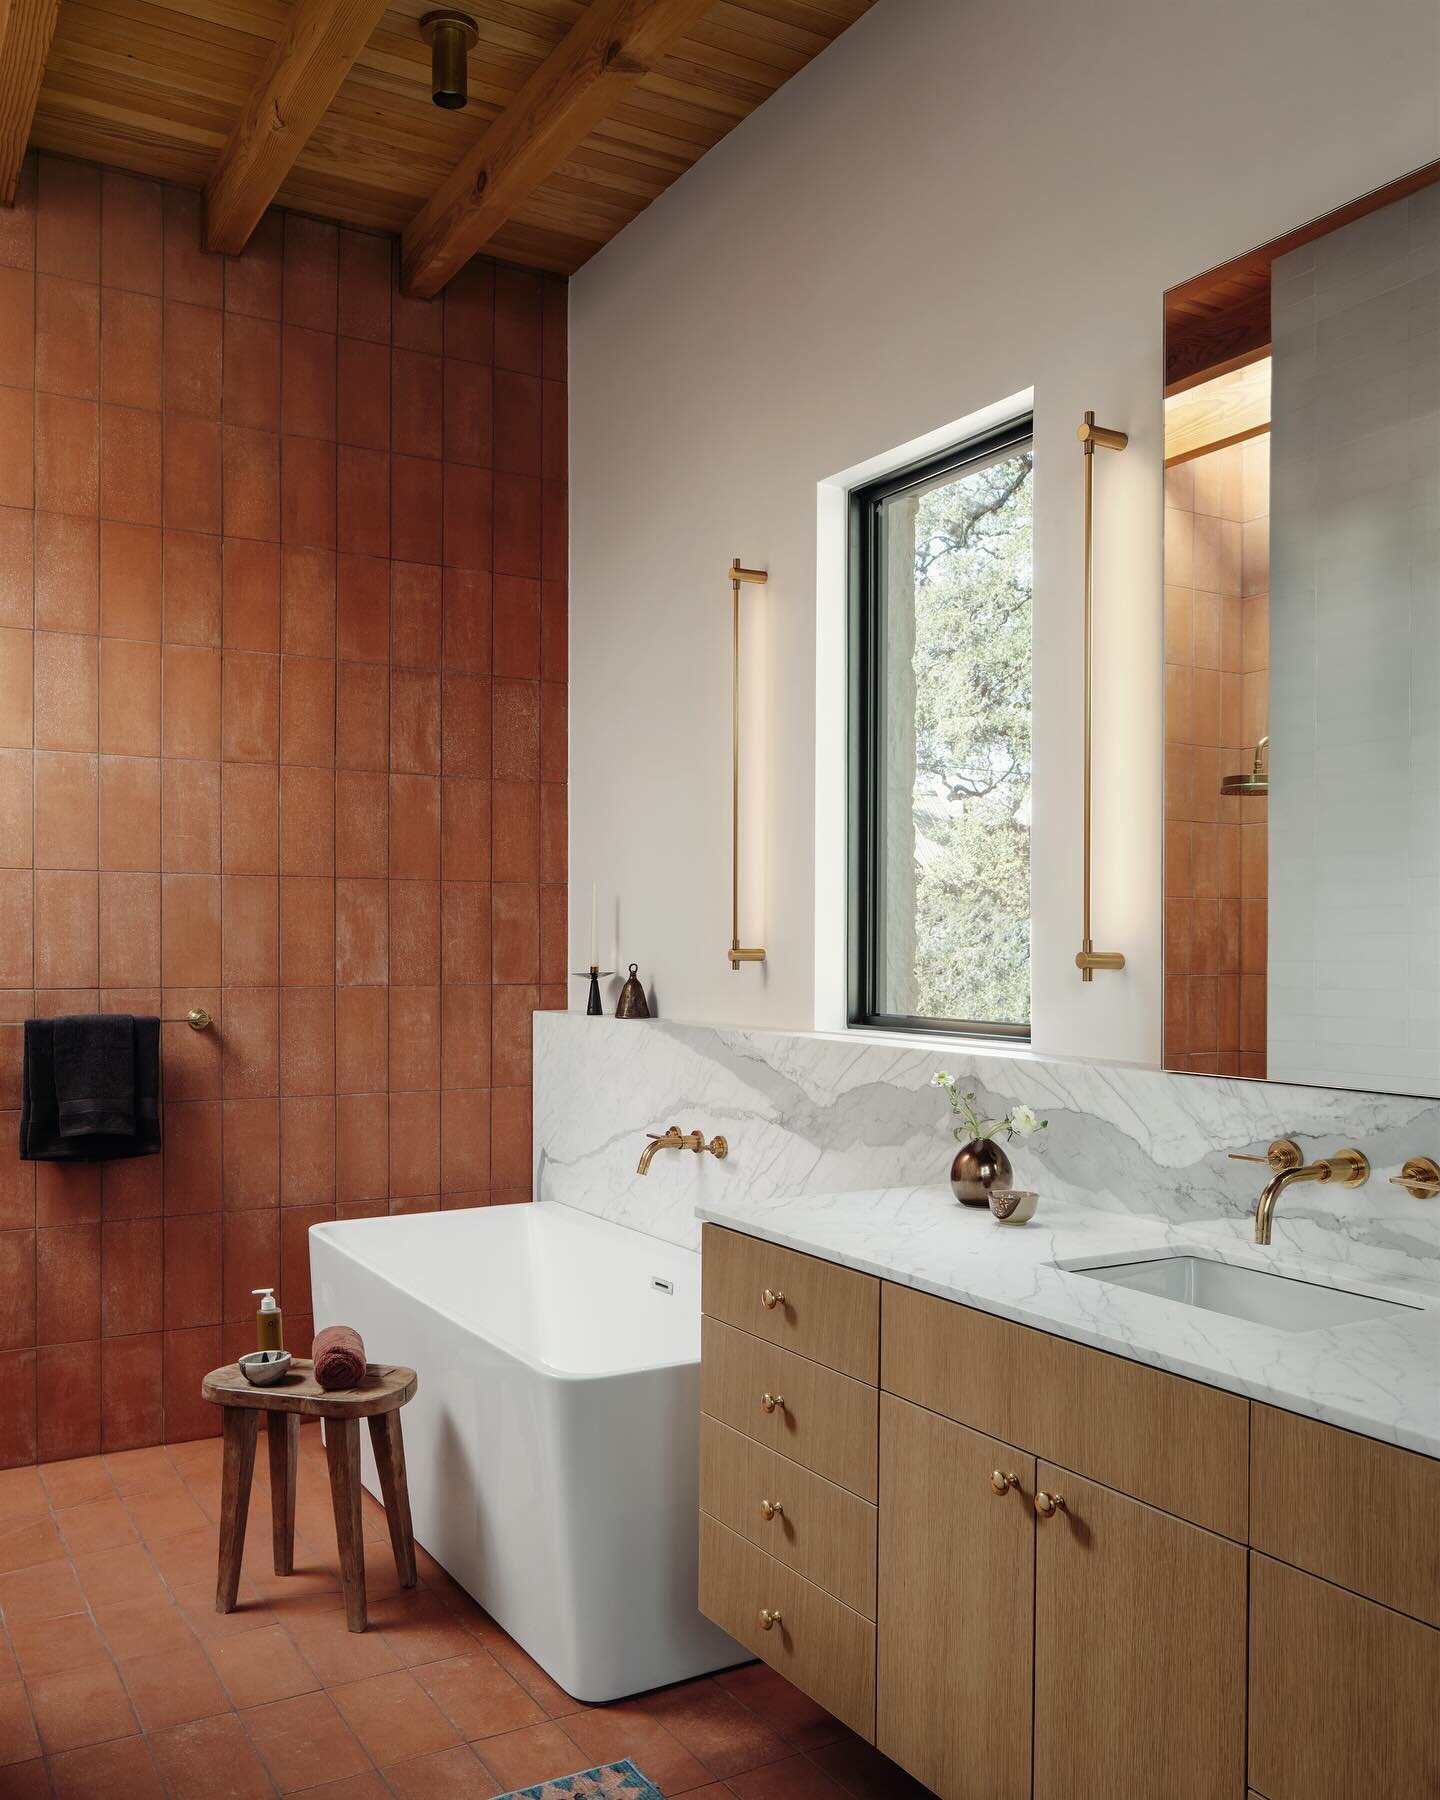 Primary bath. Lots of details coming together in here: mitered quartzite ledge, custom white oak medicine cabinets to match the window (and flush with ledge), exposed Douglas fir framing with skylight above, lots of tile layouts, wall mounted plumbin